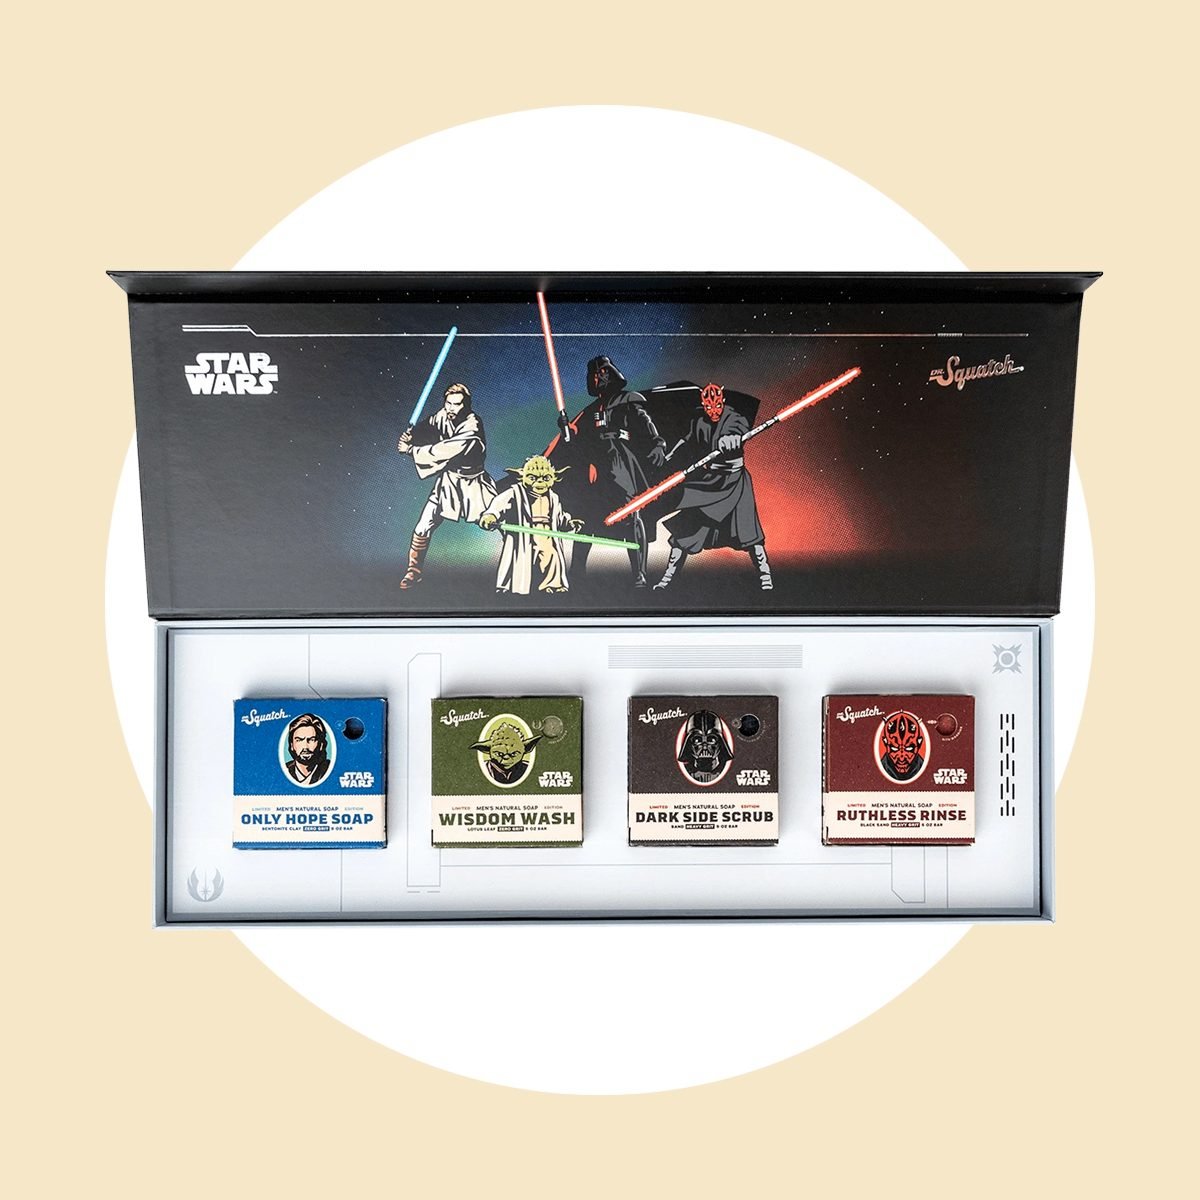 https://www.tasteofhome.com/wp-content/uploads/2021/10/The-Finest-Soap-in-the-Galaxy.jpg?fit=700%2C700